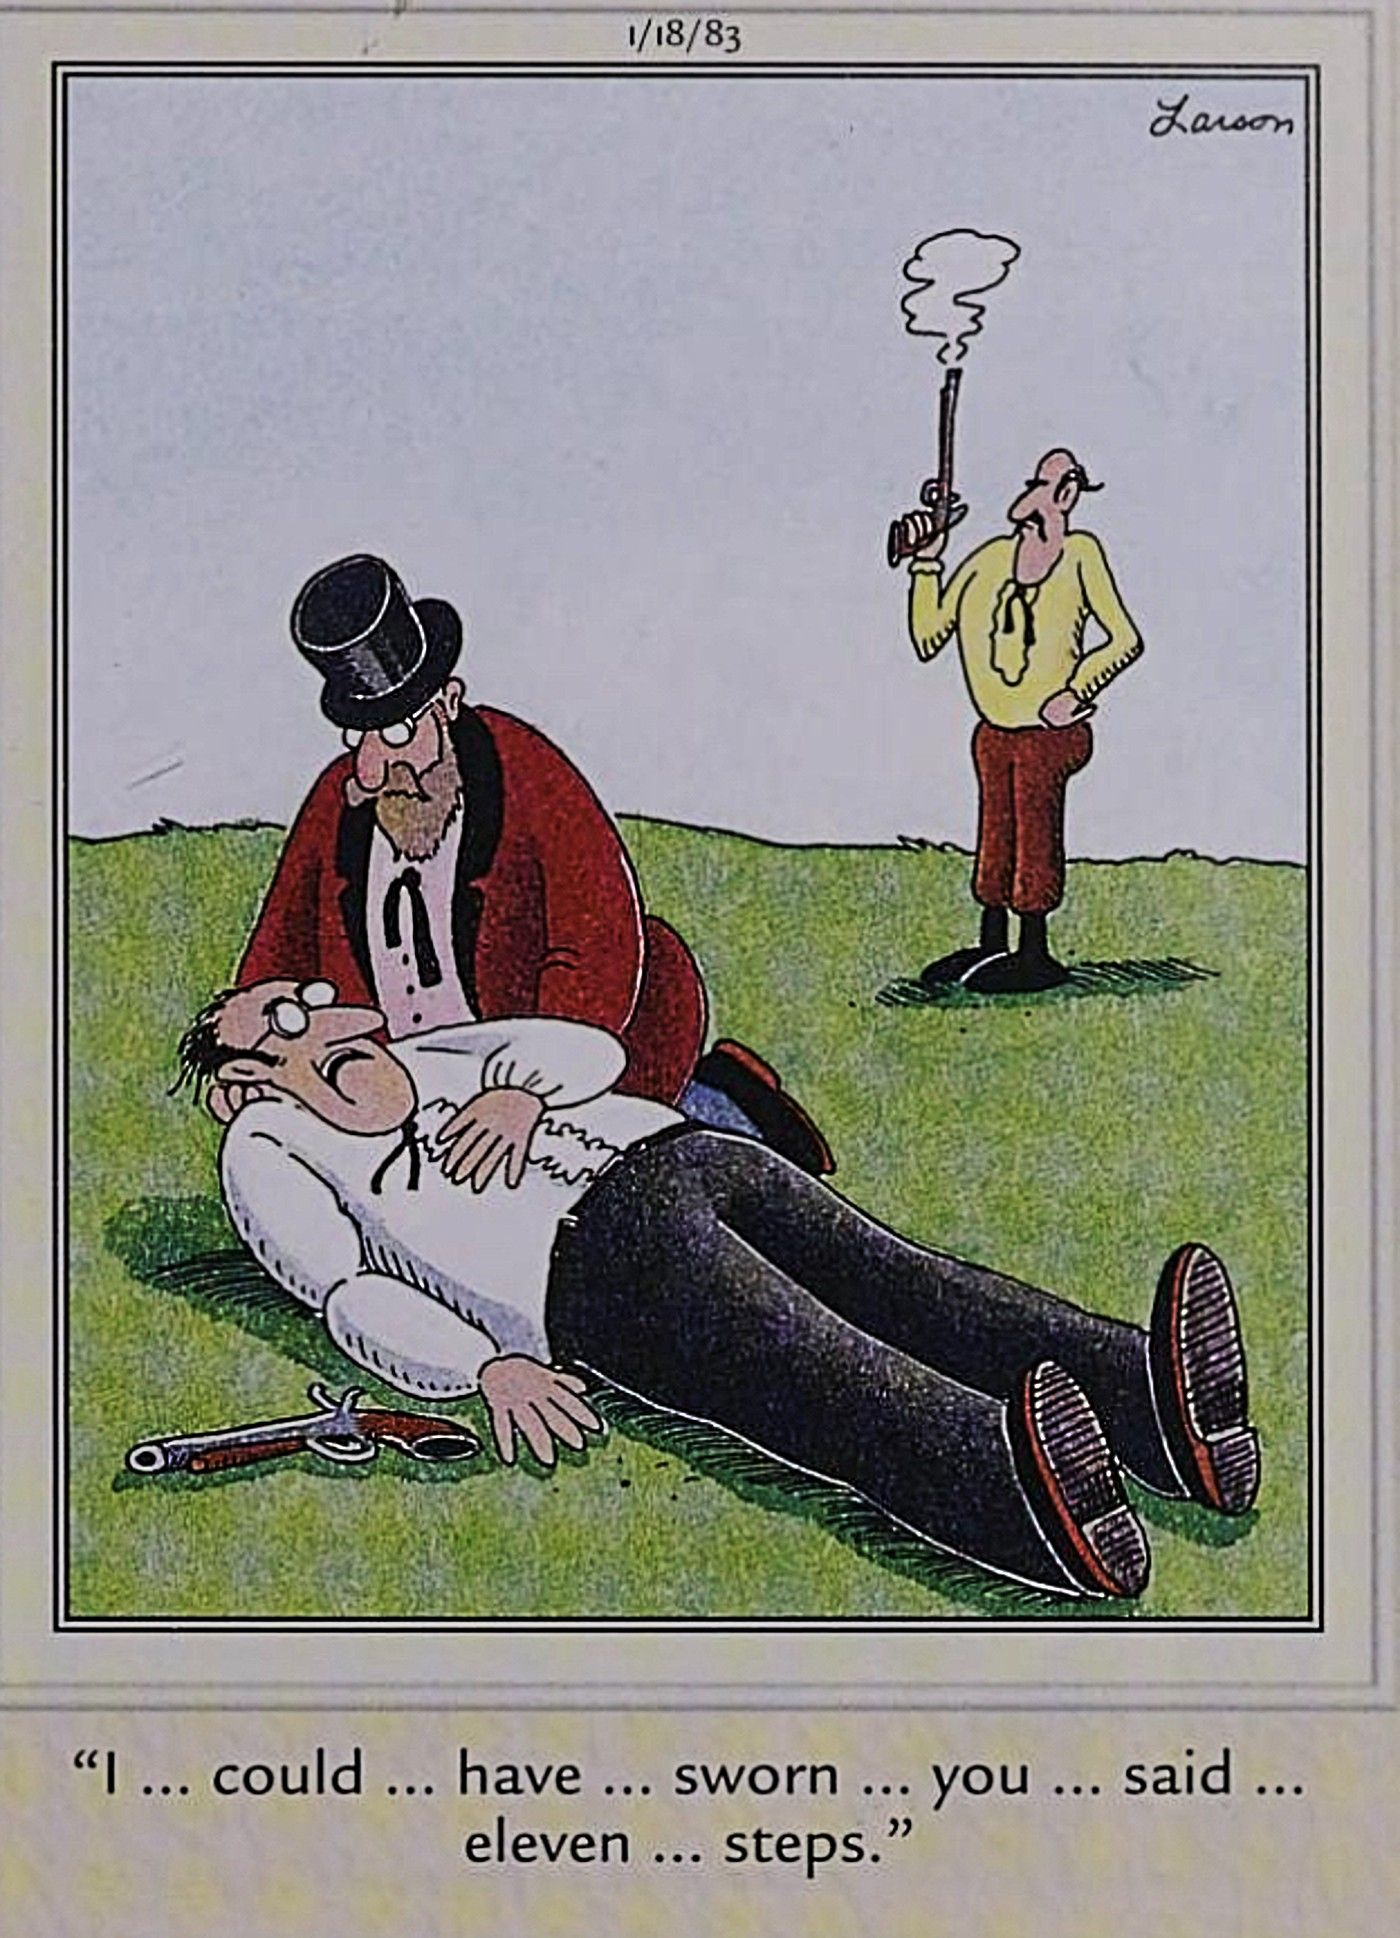 Far Side miscommunication prior to a pistol duel leads to the demise of one of the duelists.